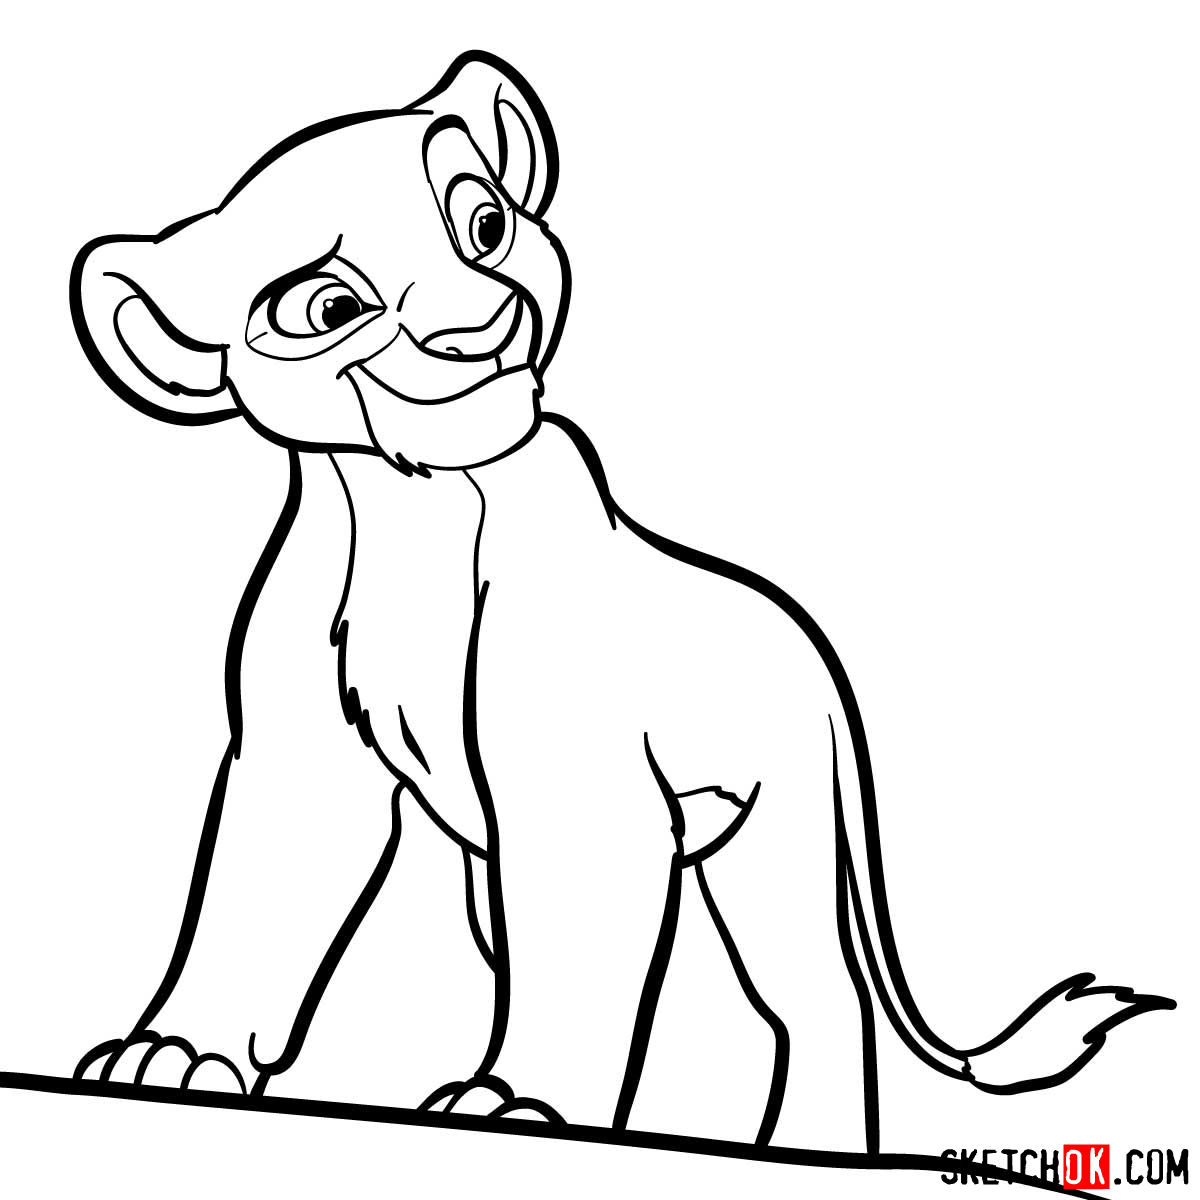 Lion King Archives Sketchok Easy Drawing Guides